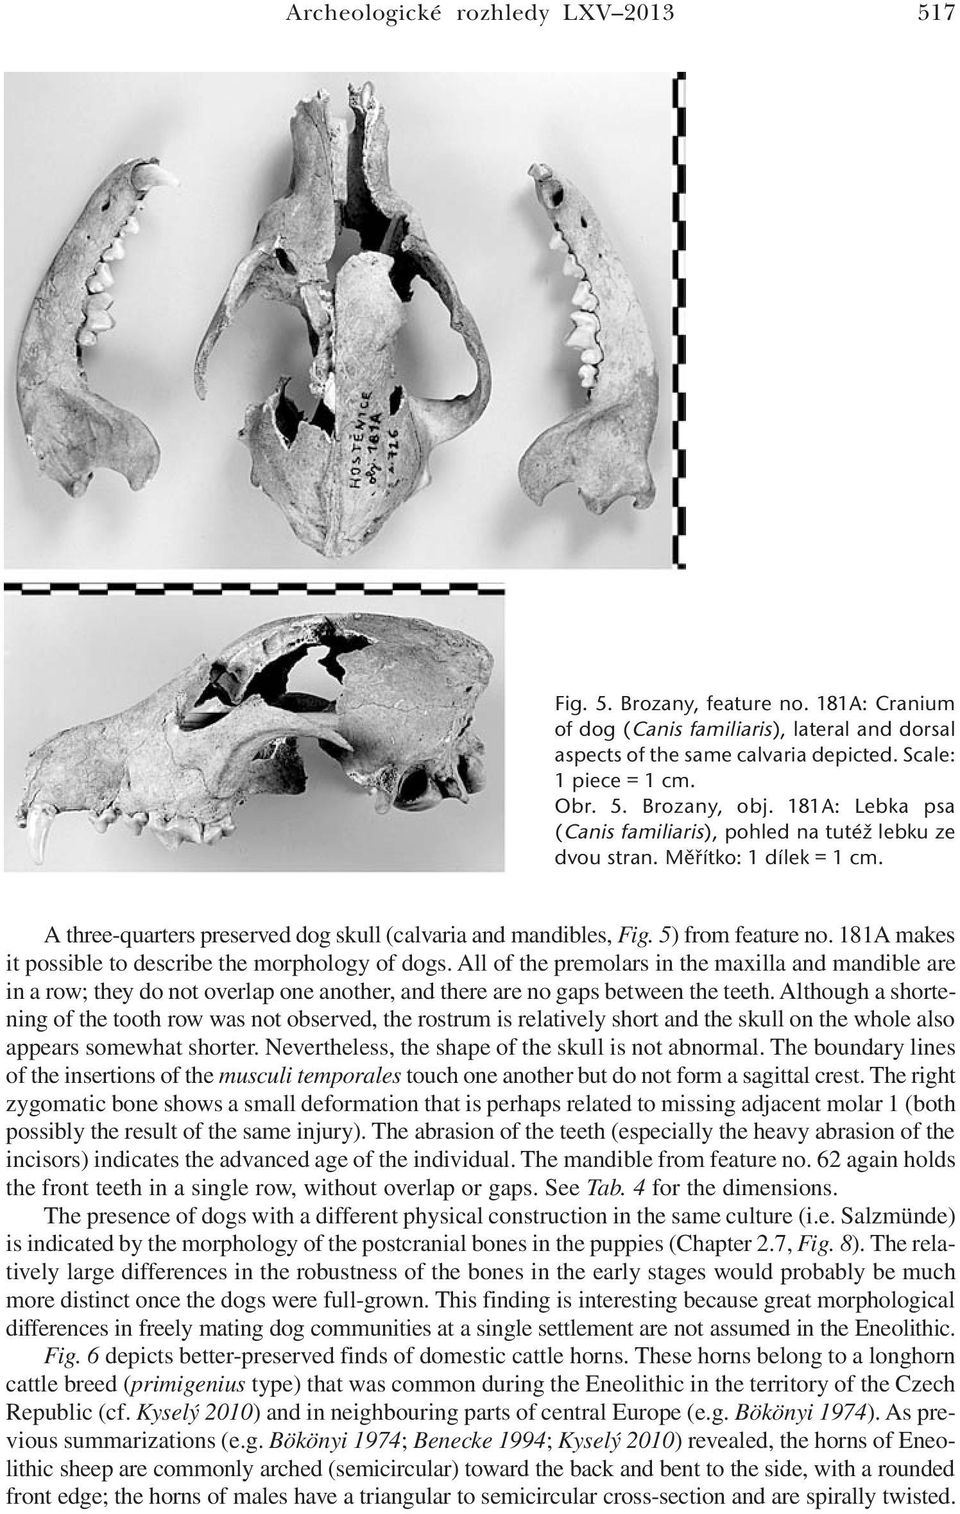 181A makes it possible to describe the morphology of dogs. All of the premolars in the maxilla and mandible are in a row; they do not overlap one another, and there are no gaps between the teeth.